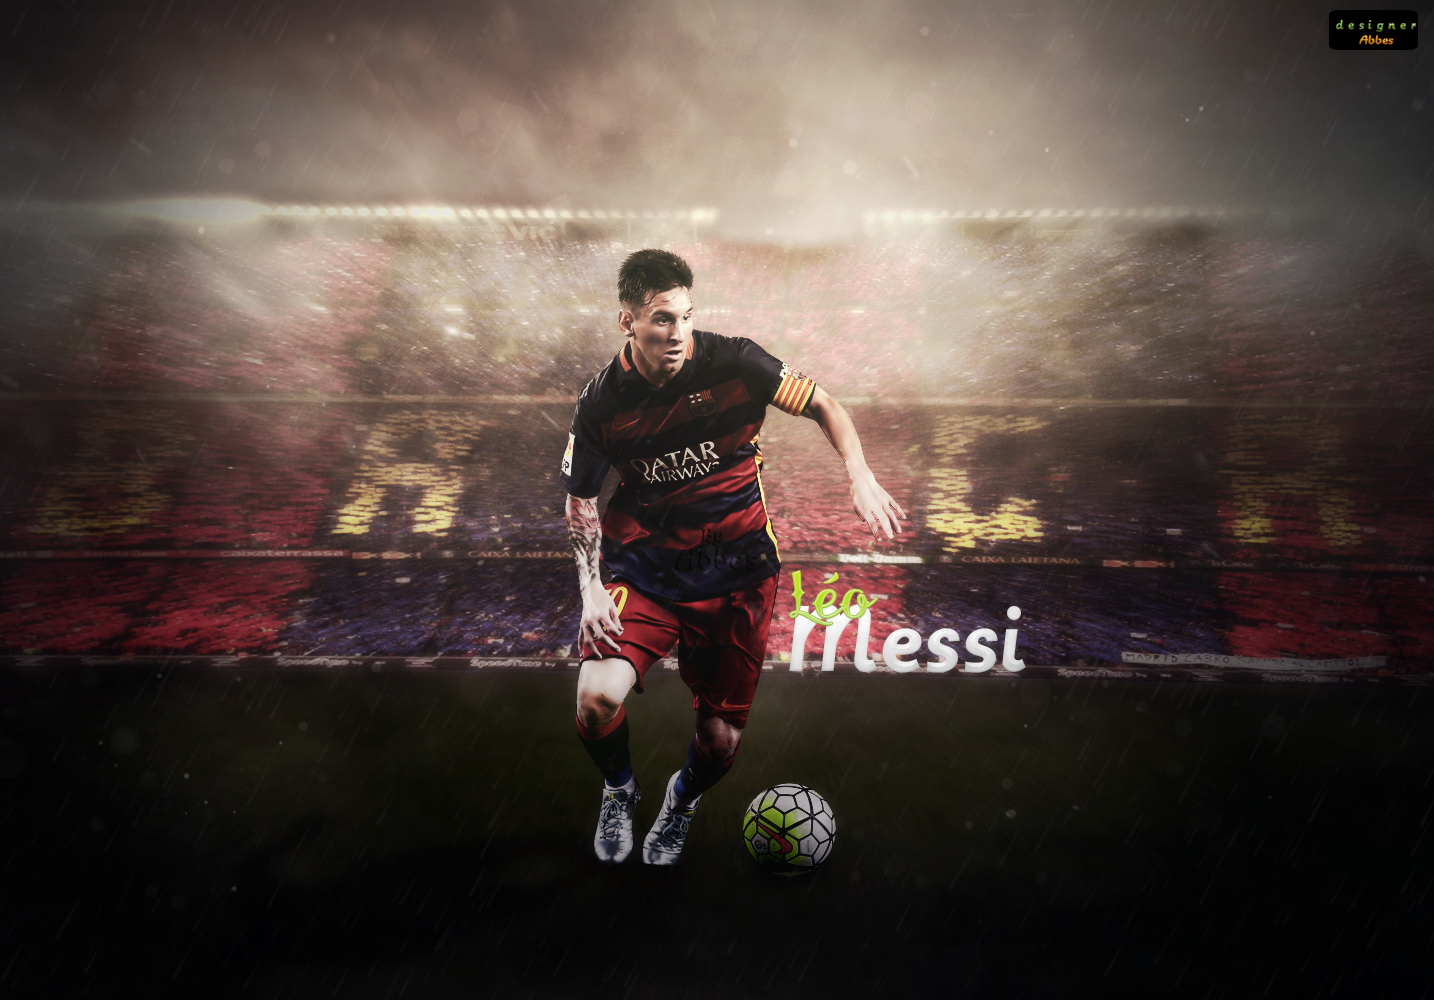 Free download leo messi 2016 by abbes17 watch fan art wallpaper other 2015 2016 [1434x1000] for your Desktop, Mobile & Tablet. Explore Leo Messi Wallpaper 2016. Leo Messi Wallpaper Leo Messi Wallpaper, Leo Messi 2019 Wallpaper